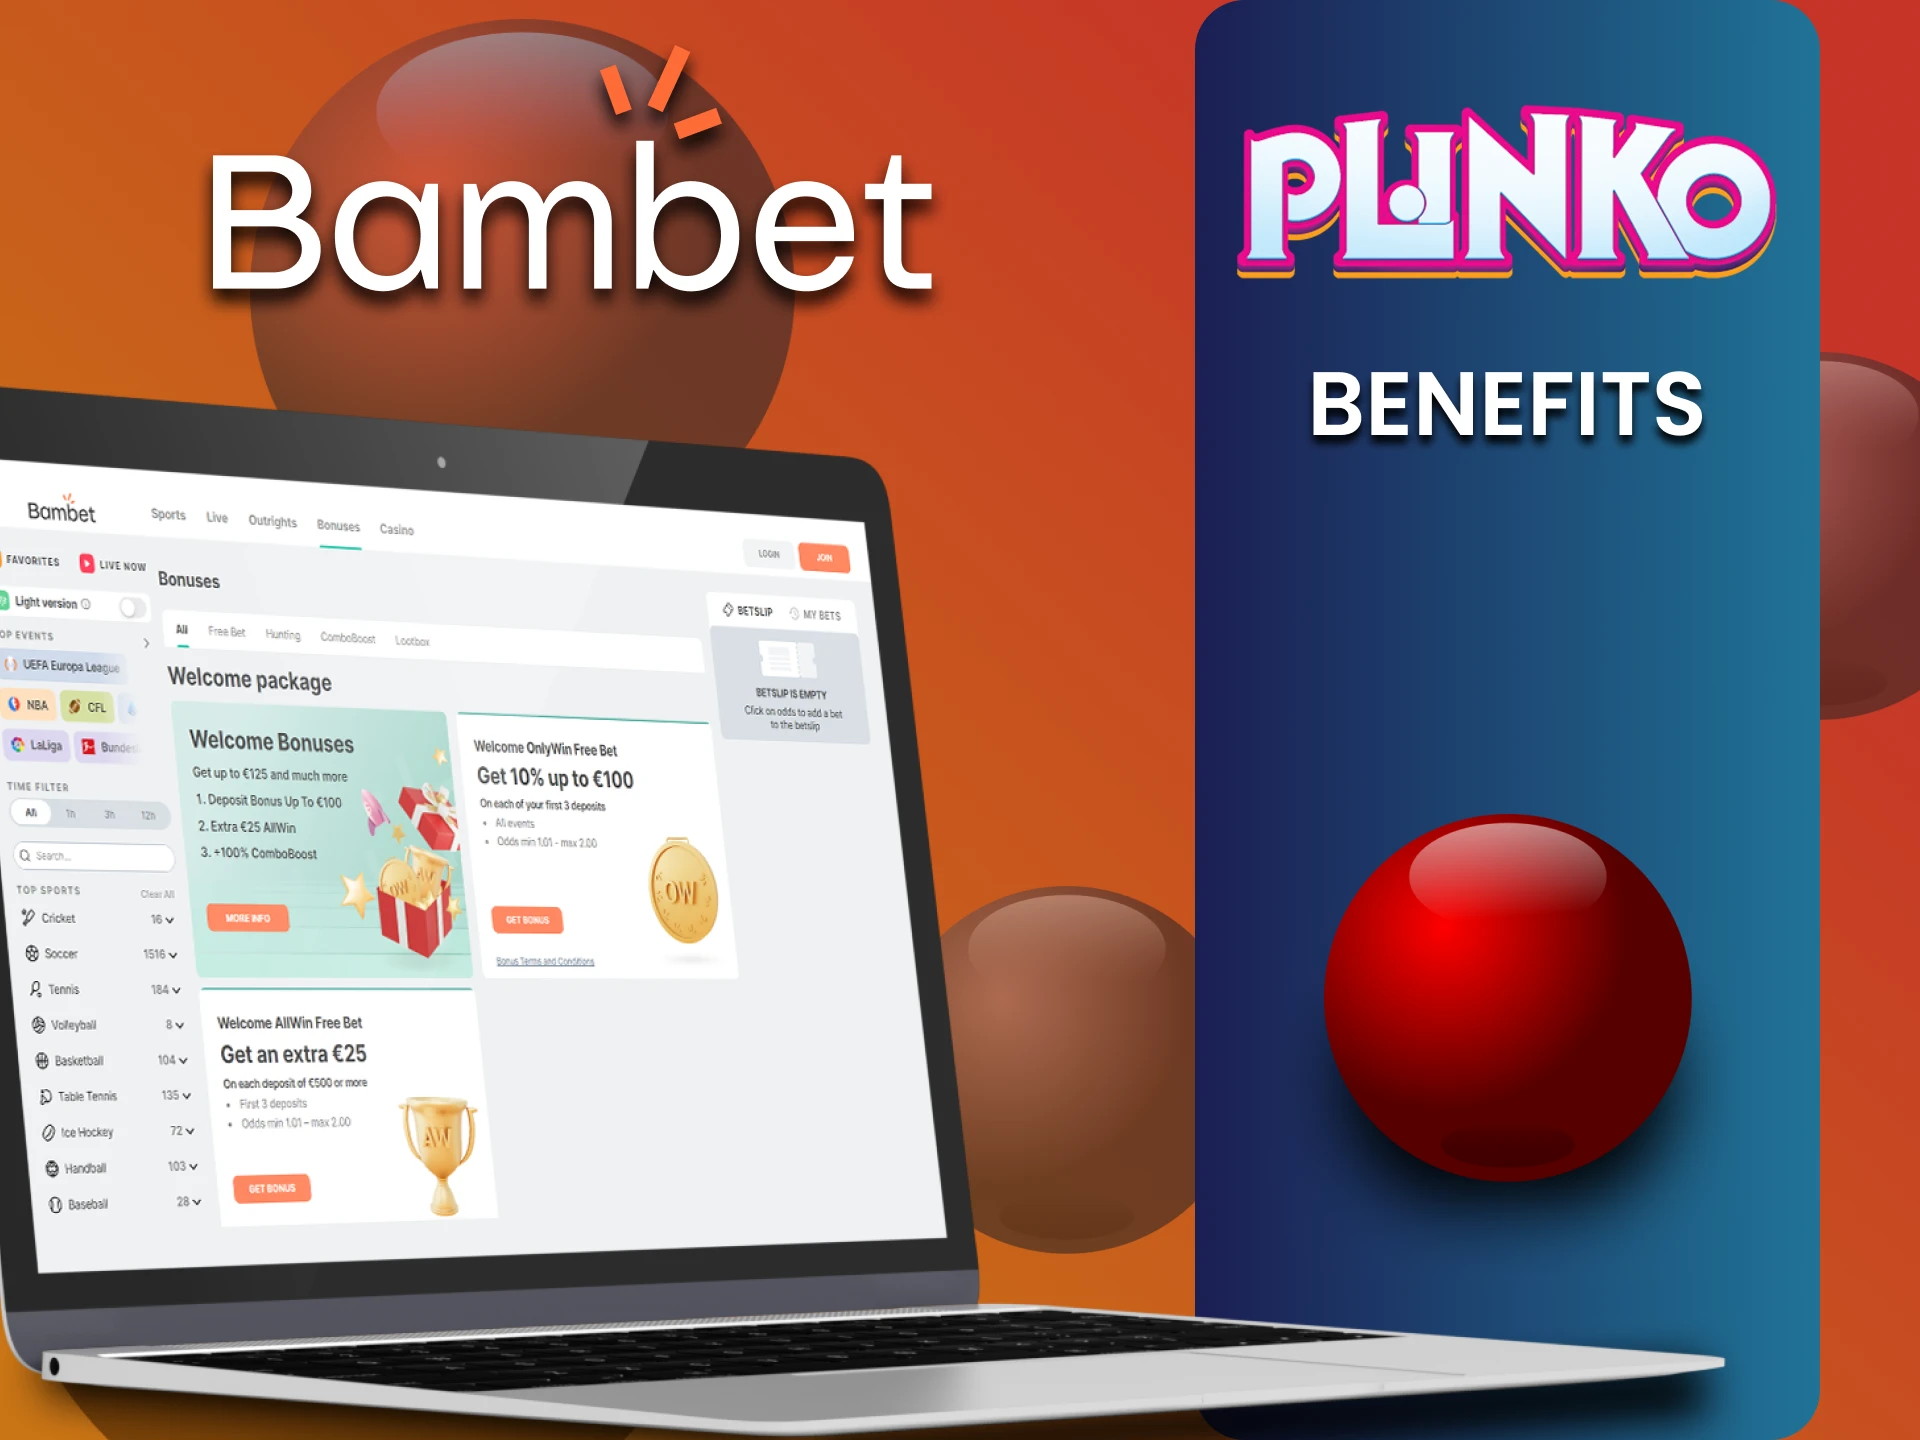 Bambet has a huge number of advantages for Plinko users.